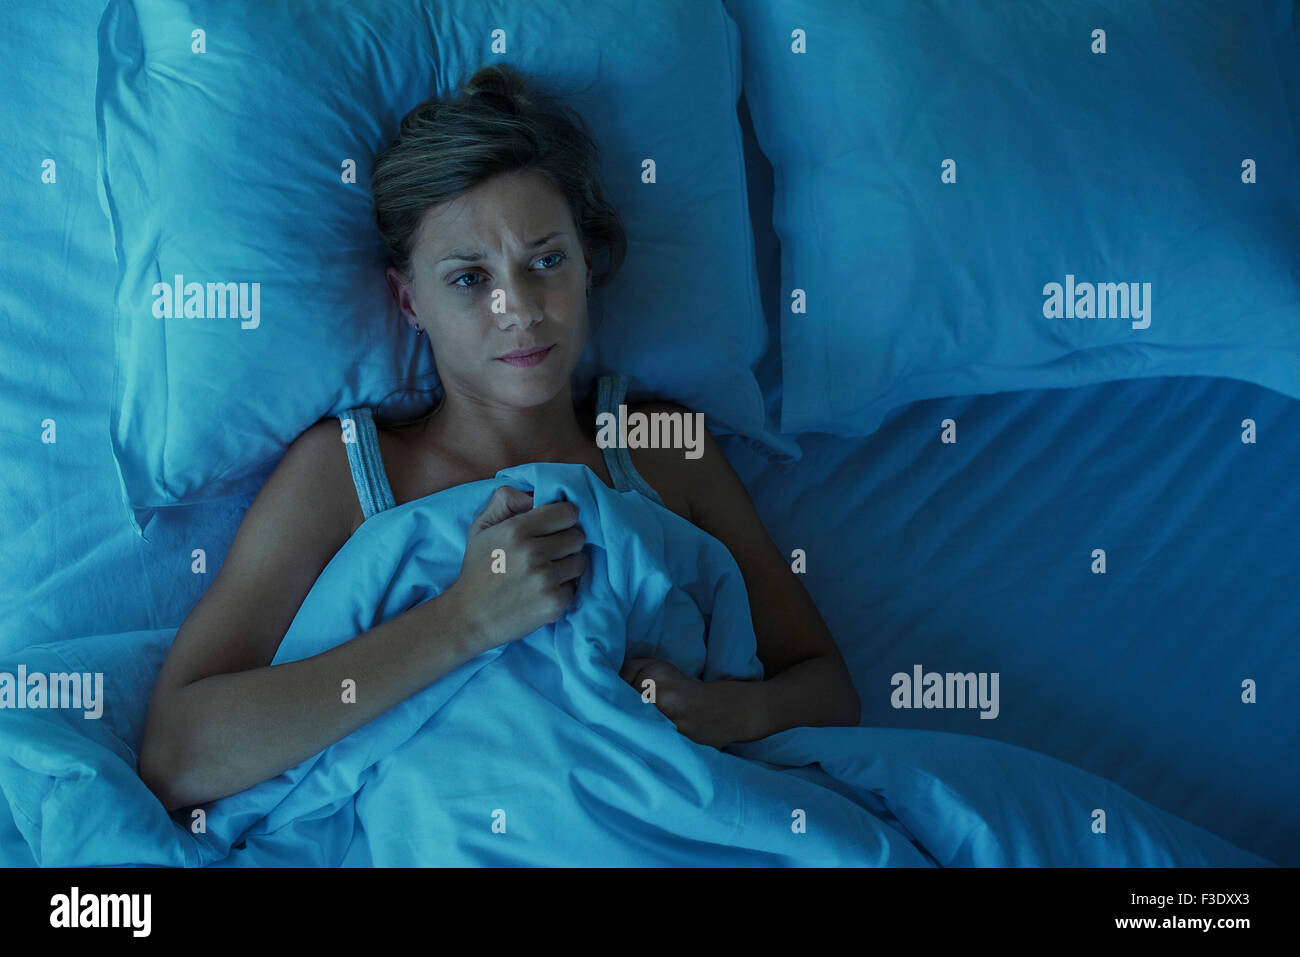 Woman lying alone in bed with upset expression on face Stock Photo